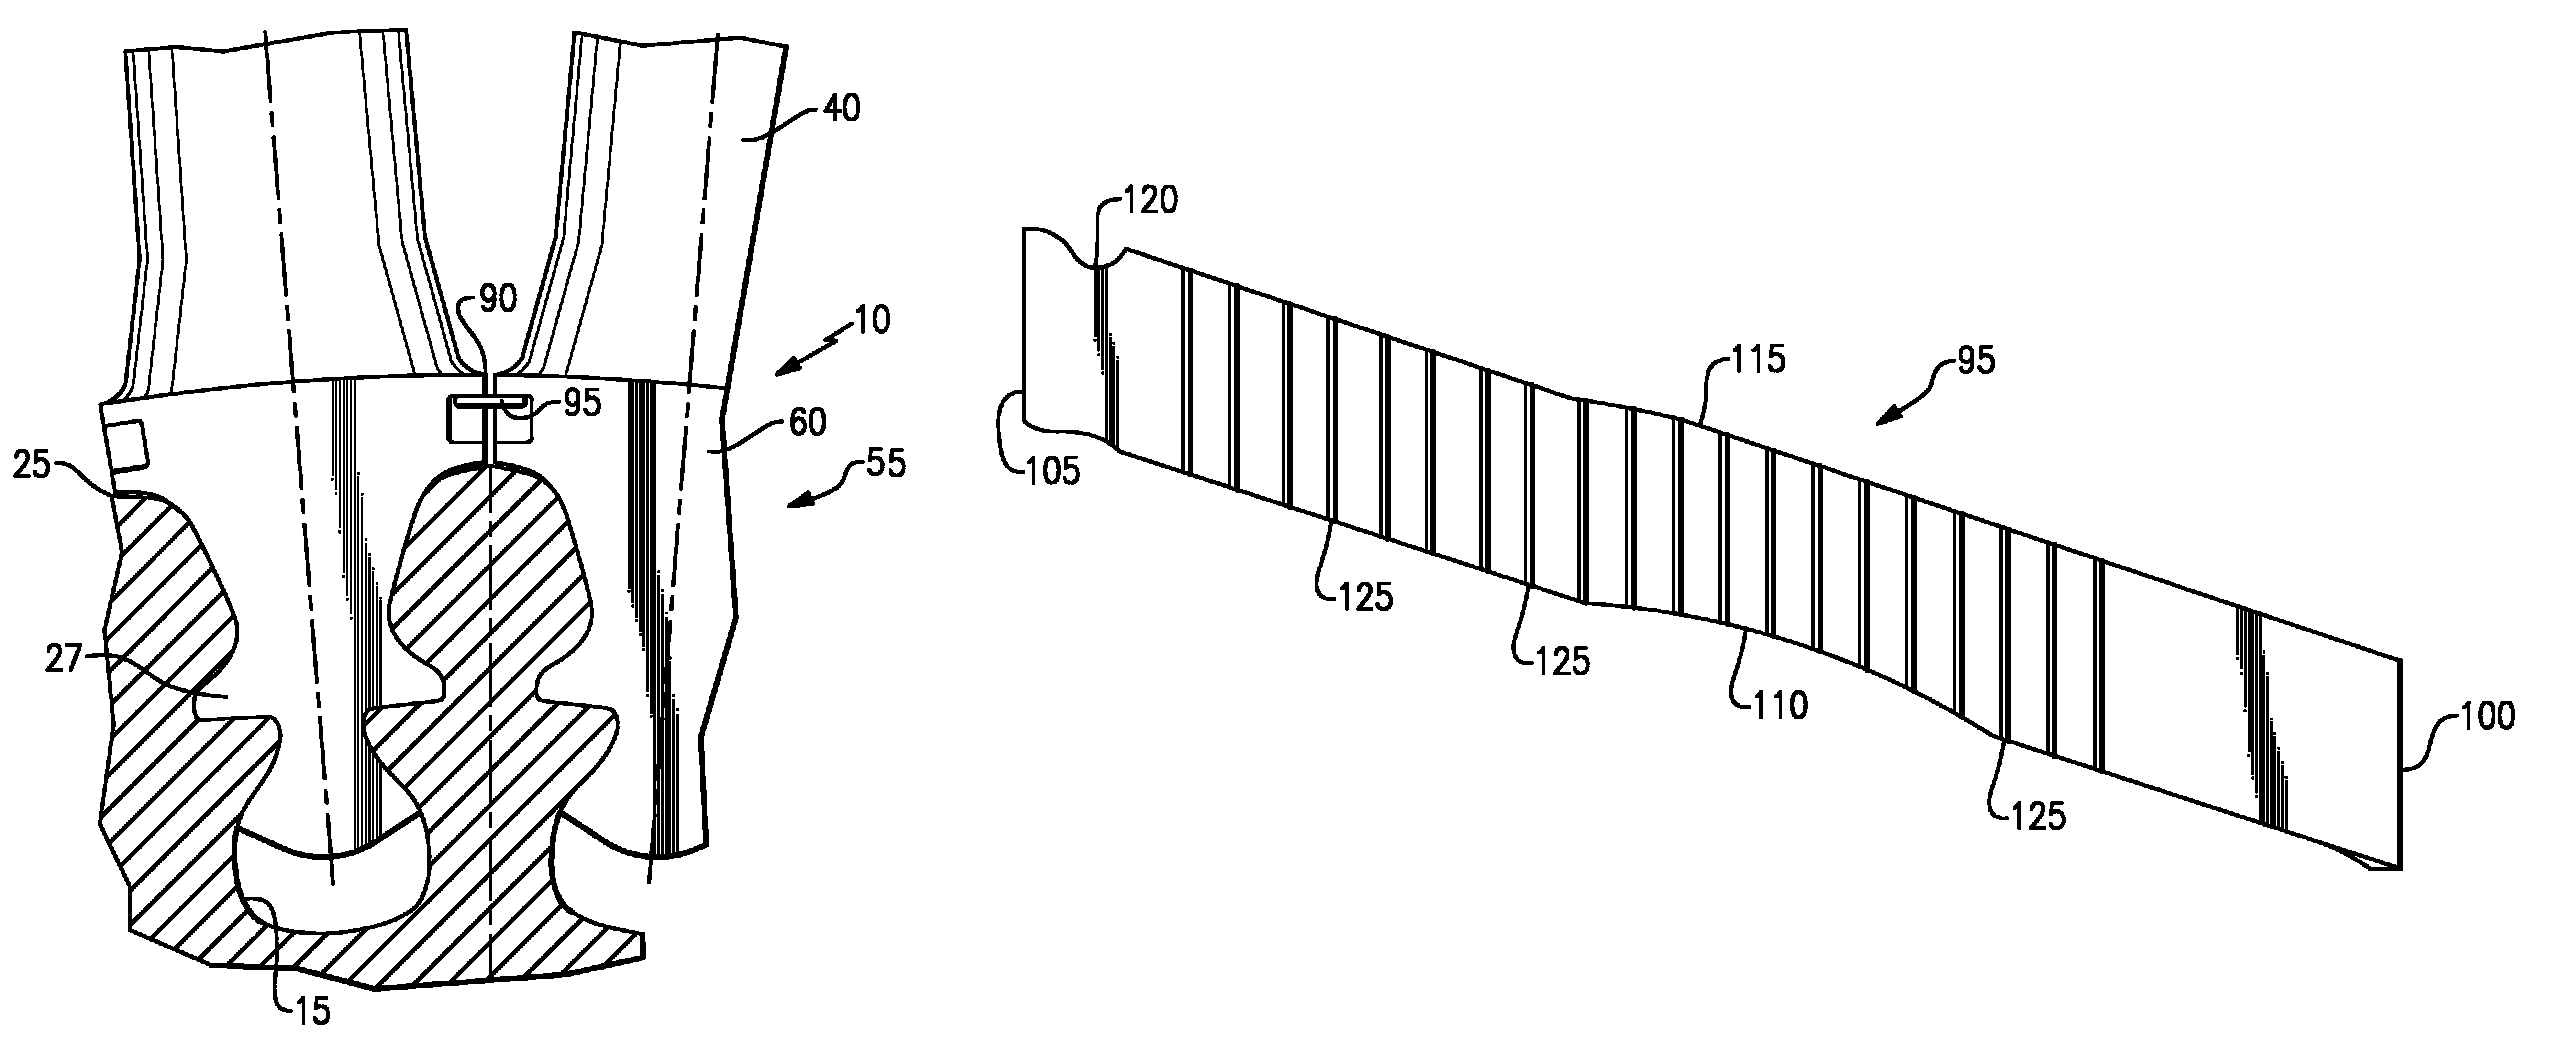 Turbine airfoil with platform cooling